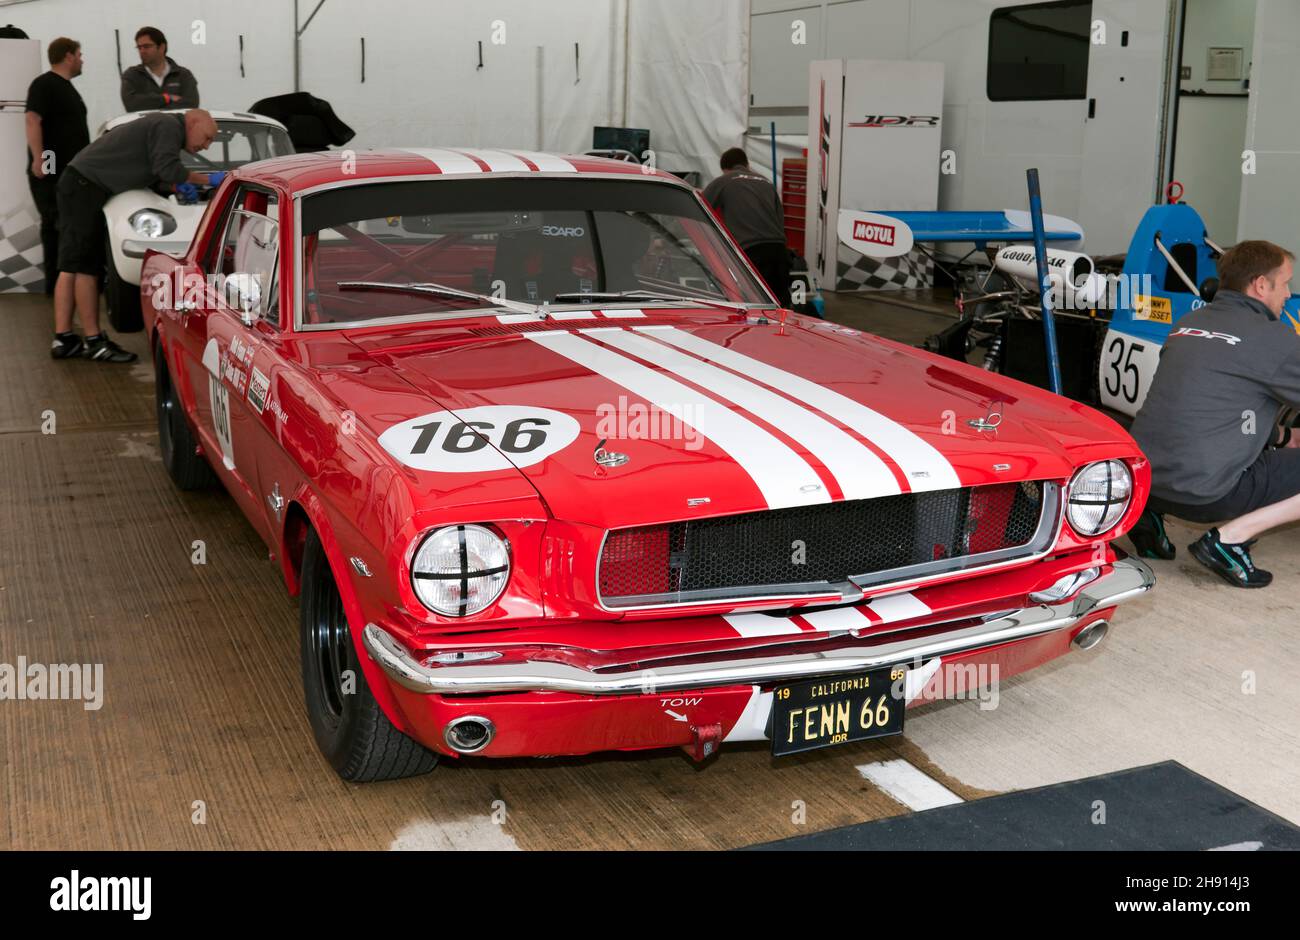 View of the JDR Racing Teams pit Garage, with Robb Fenns, Red,  1965, Ford Mustang, at the front, at the 2021 Silverstone Classic Stock Photo